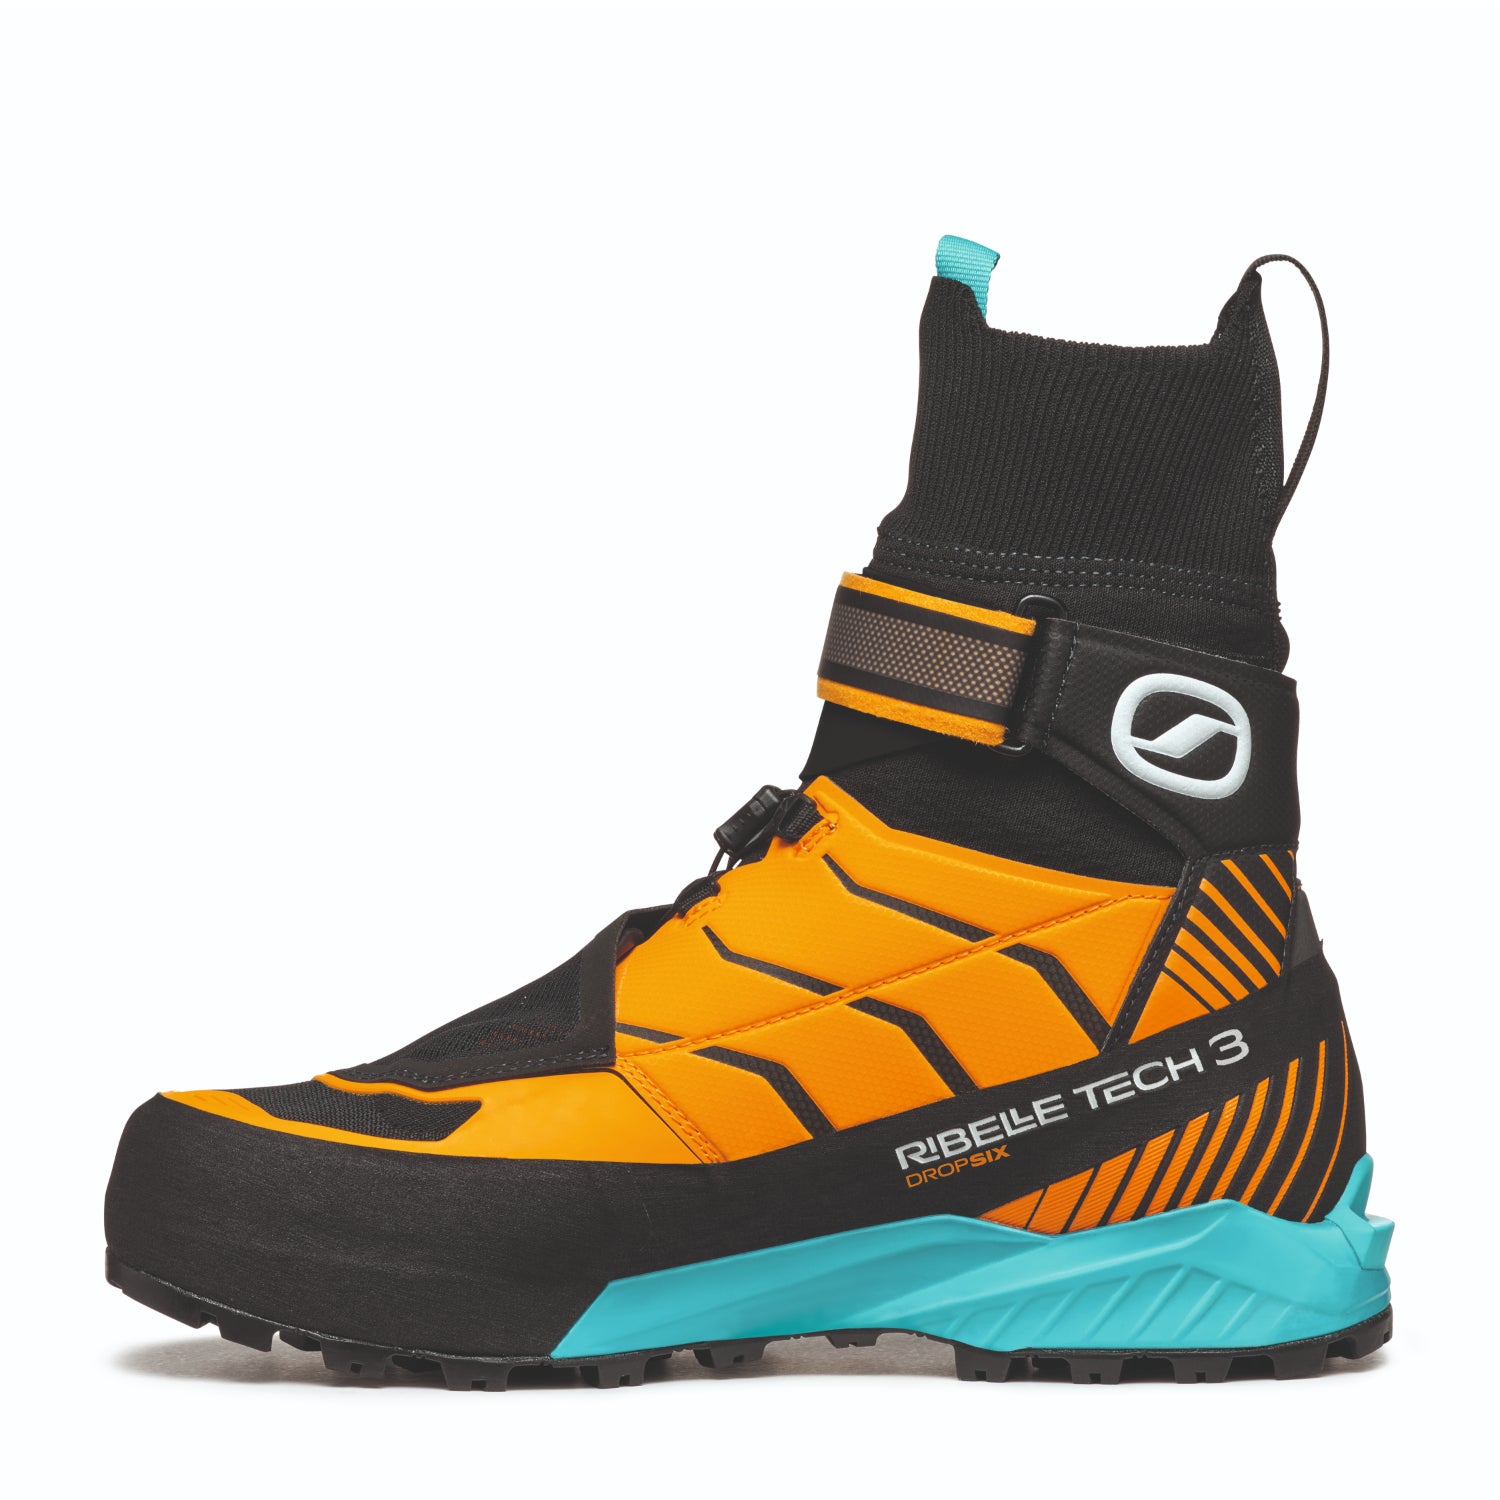 Scarpa Ribelle Tech 3 HD mens mountain boots in orange and black 